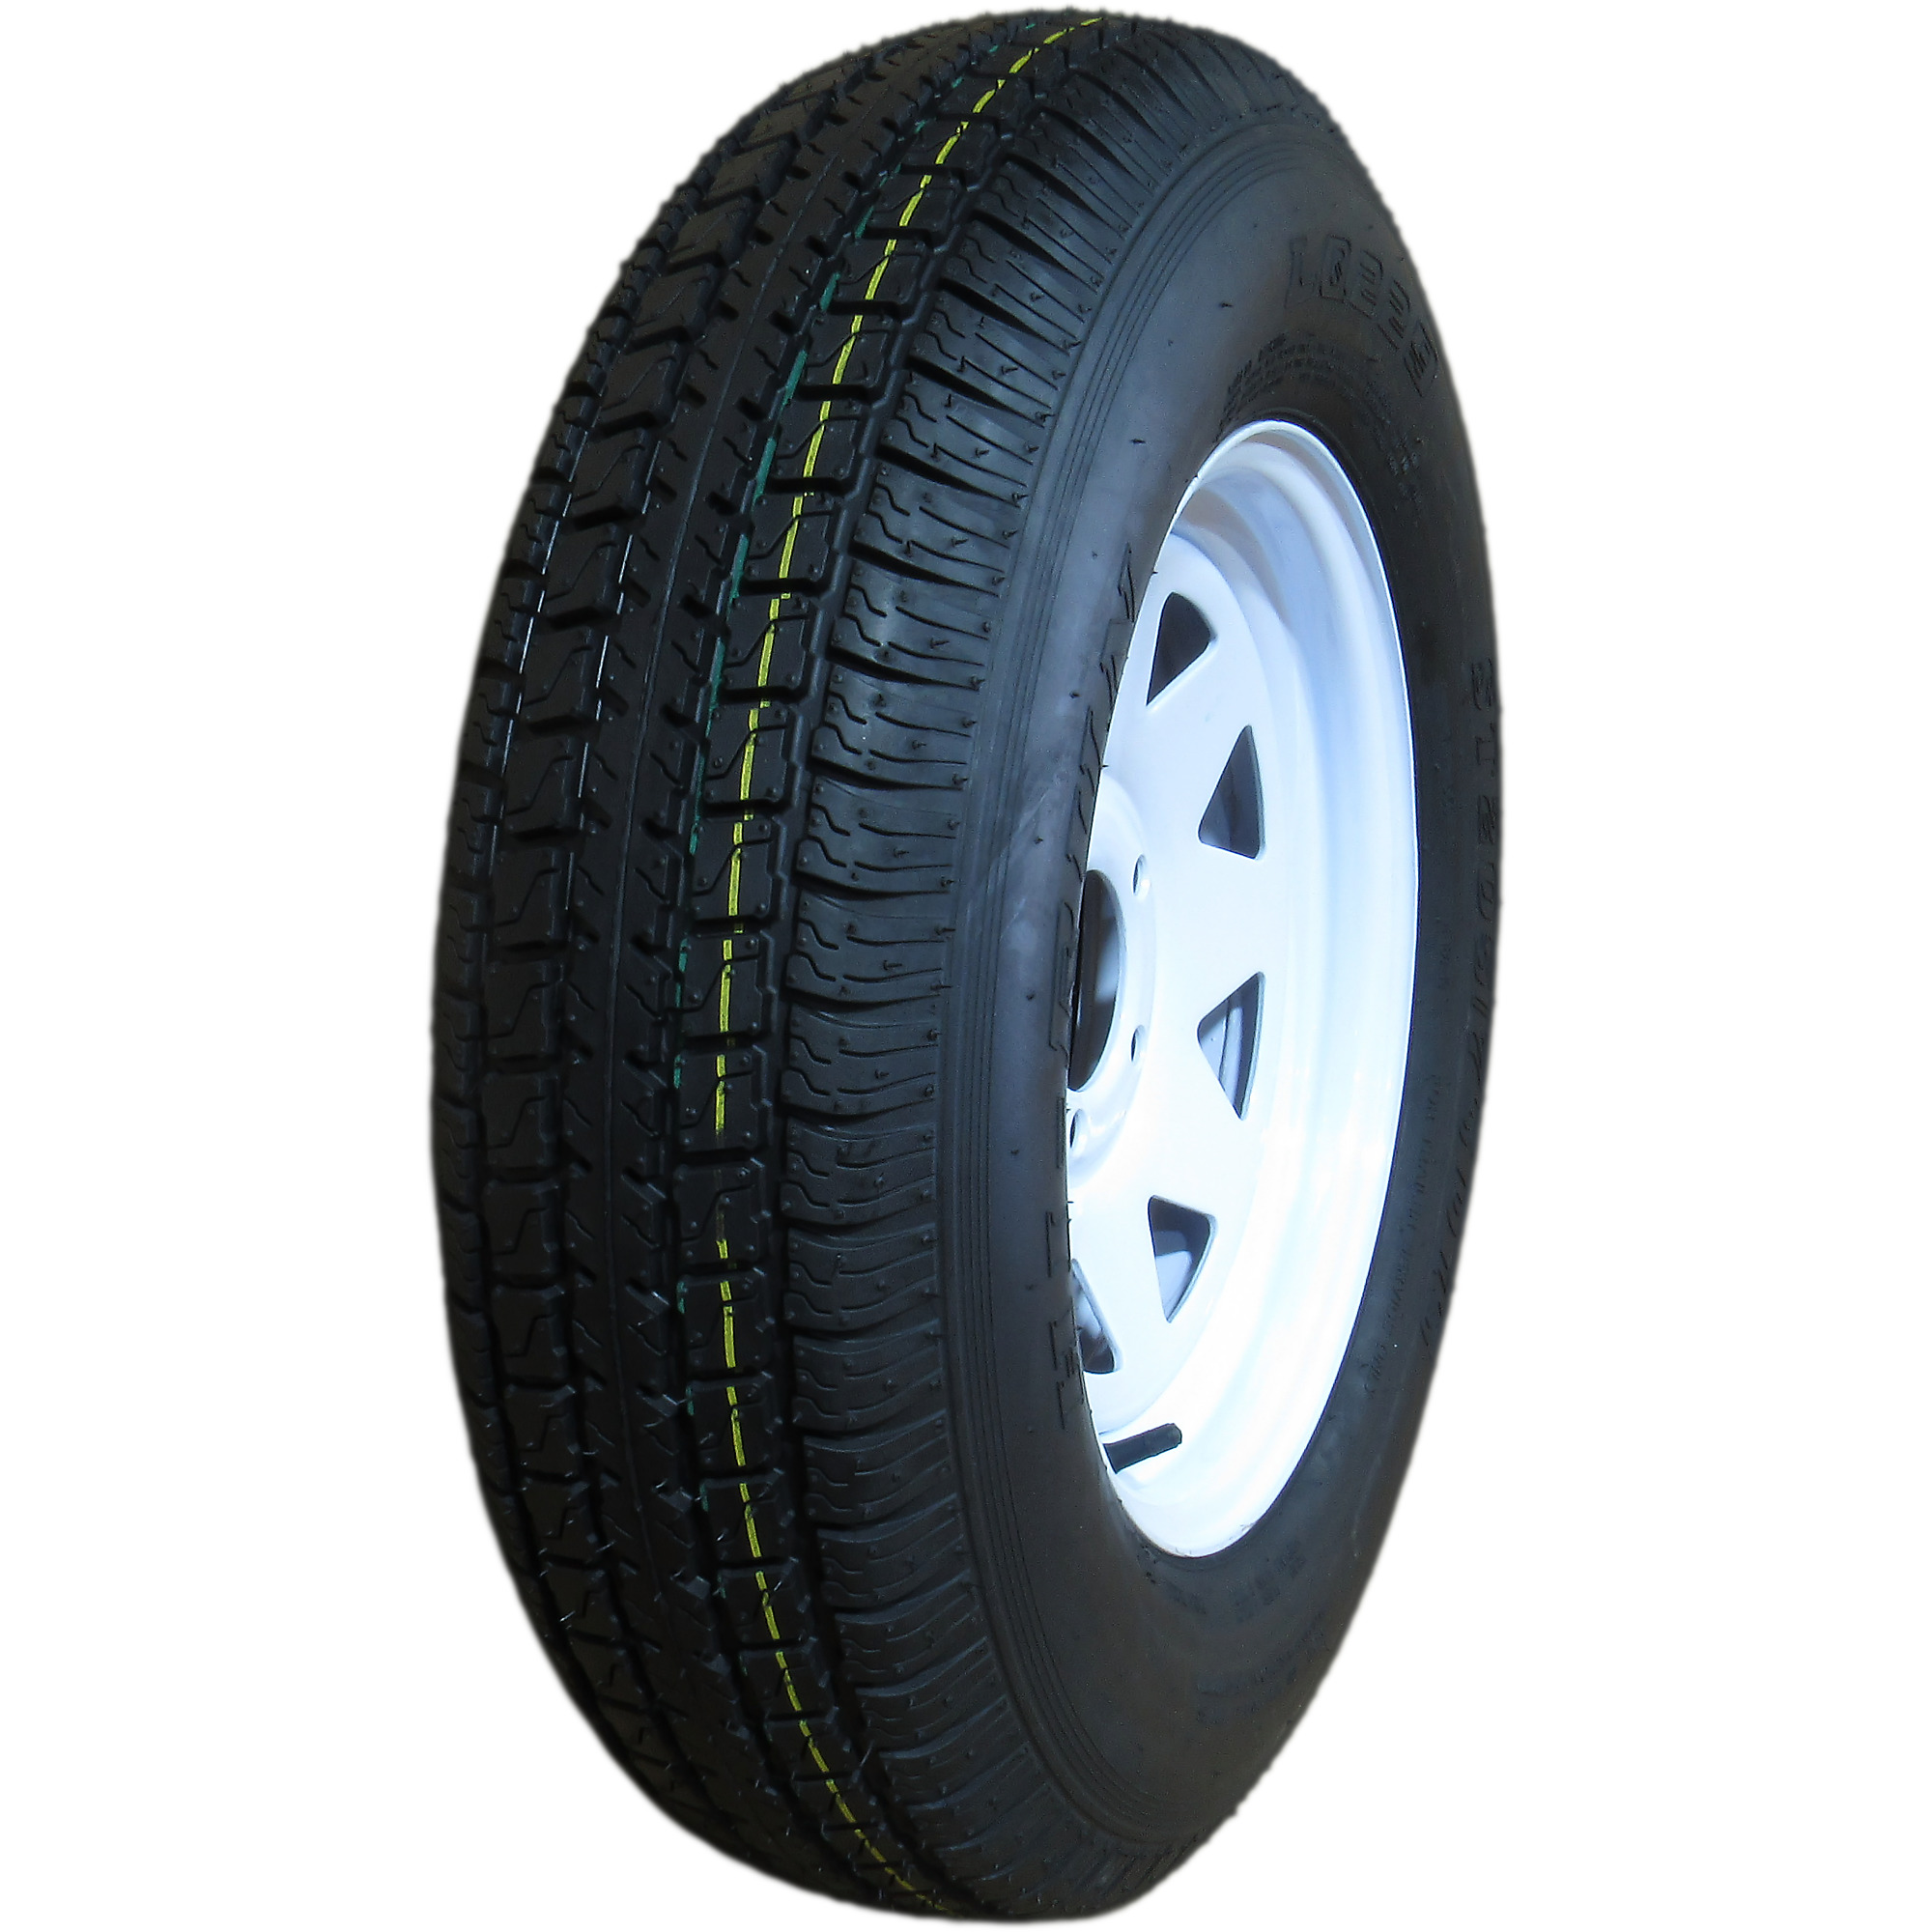 HI-RUN, Highway Trailer Tire Assembly, Bias-Ply, Spoked, Tire Size ST175/80D13 Load Range Rating C, Bolt Holes (qty.) 5 Model ASB1001